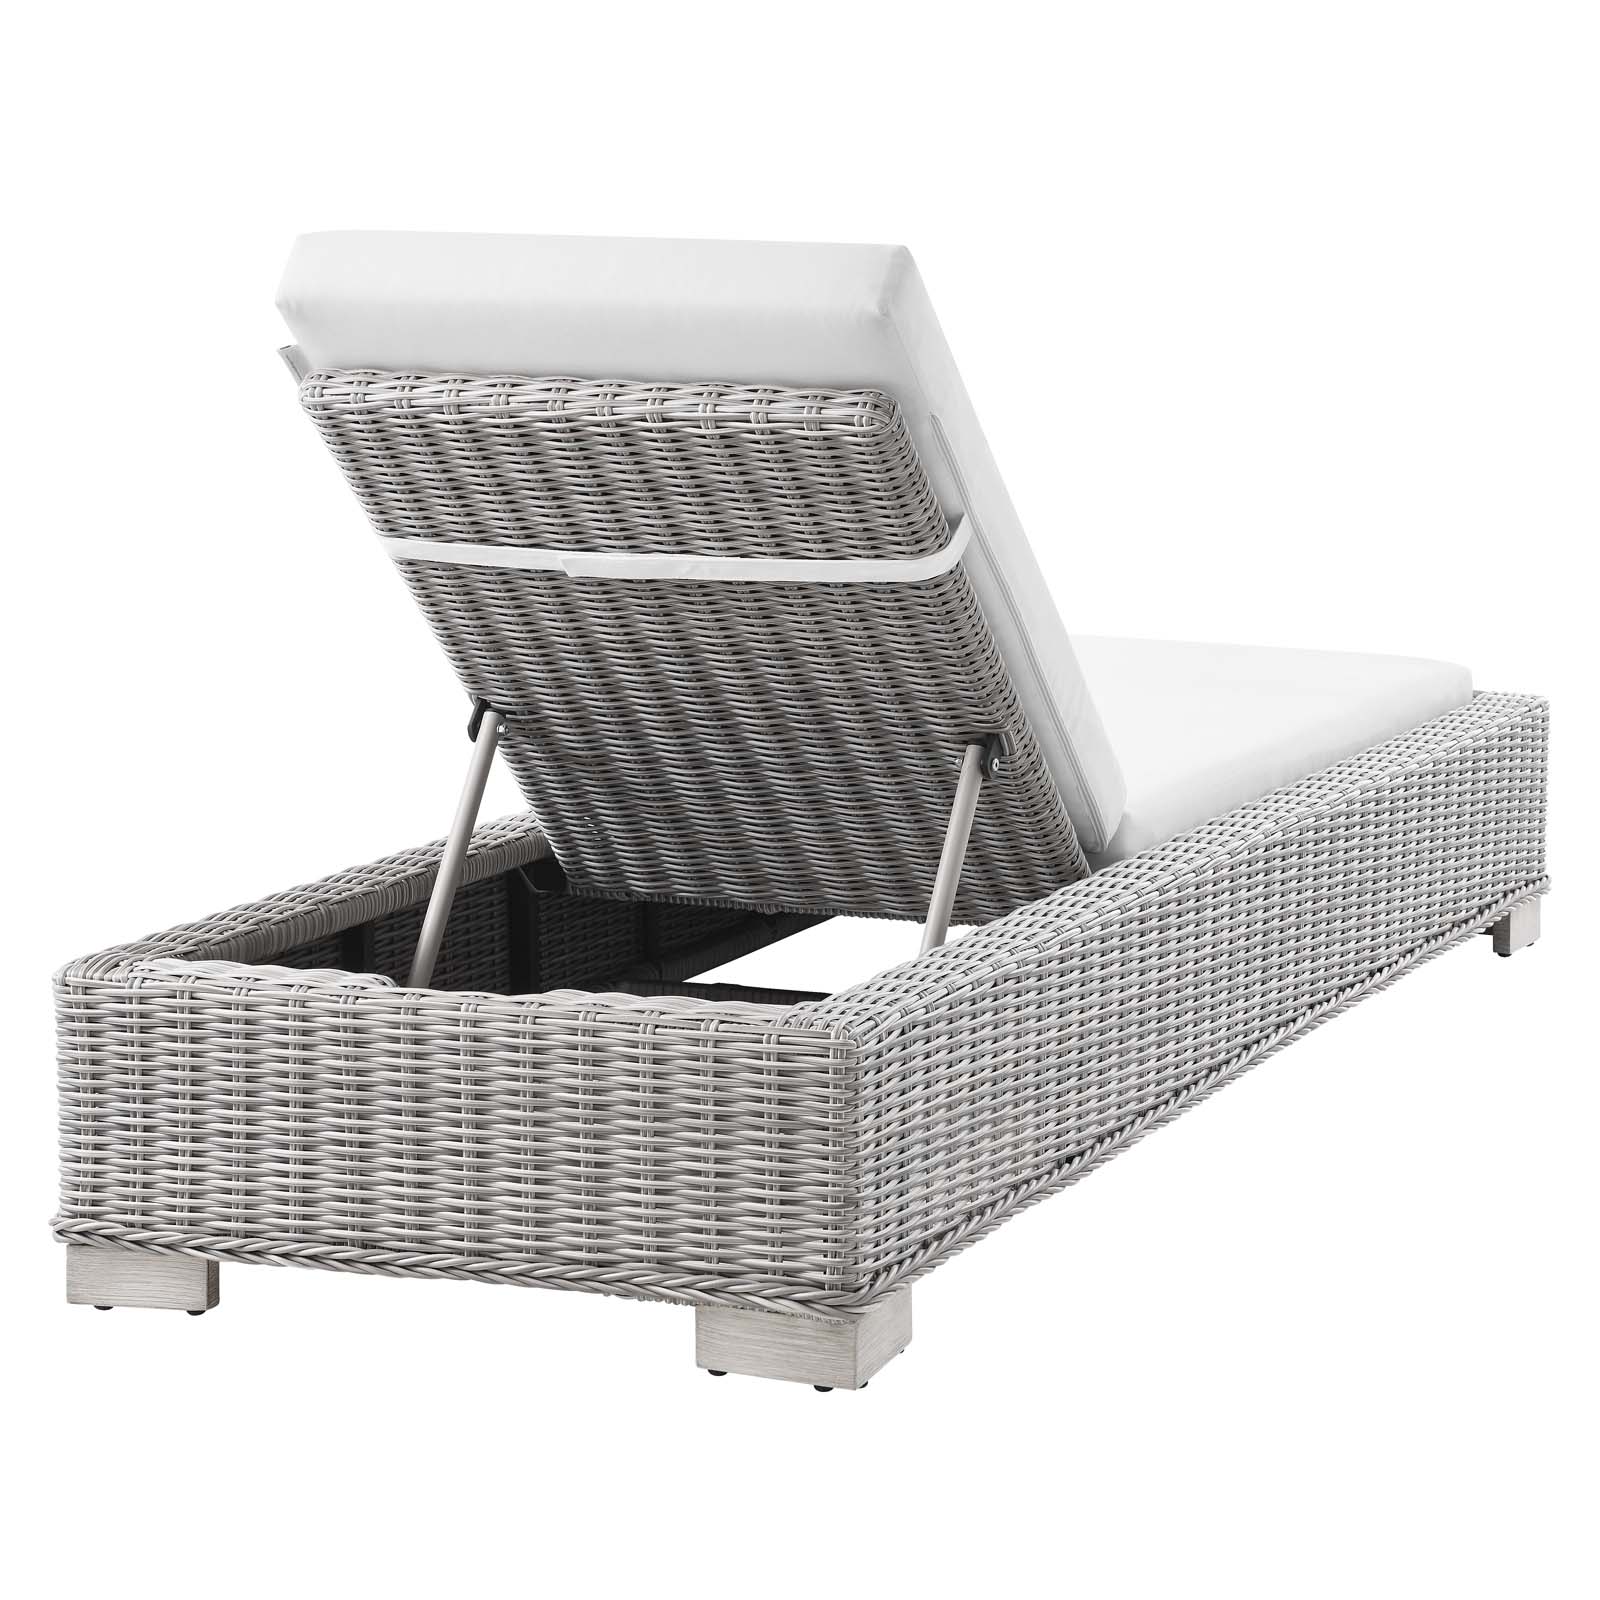 Modway Conway Outdoor Patio Wicker Rattan Chaise Lounge in Light Gray White - image 5 of 9